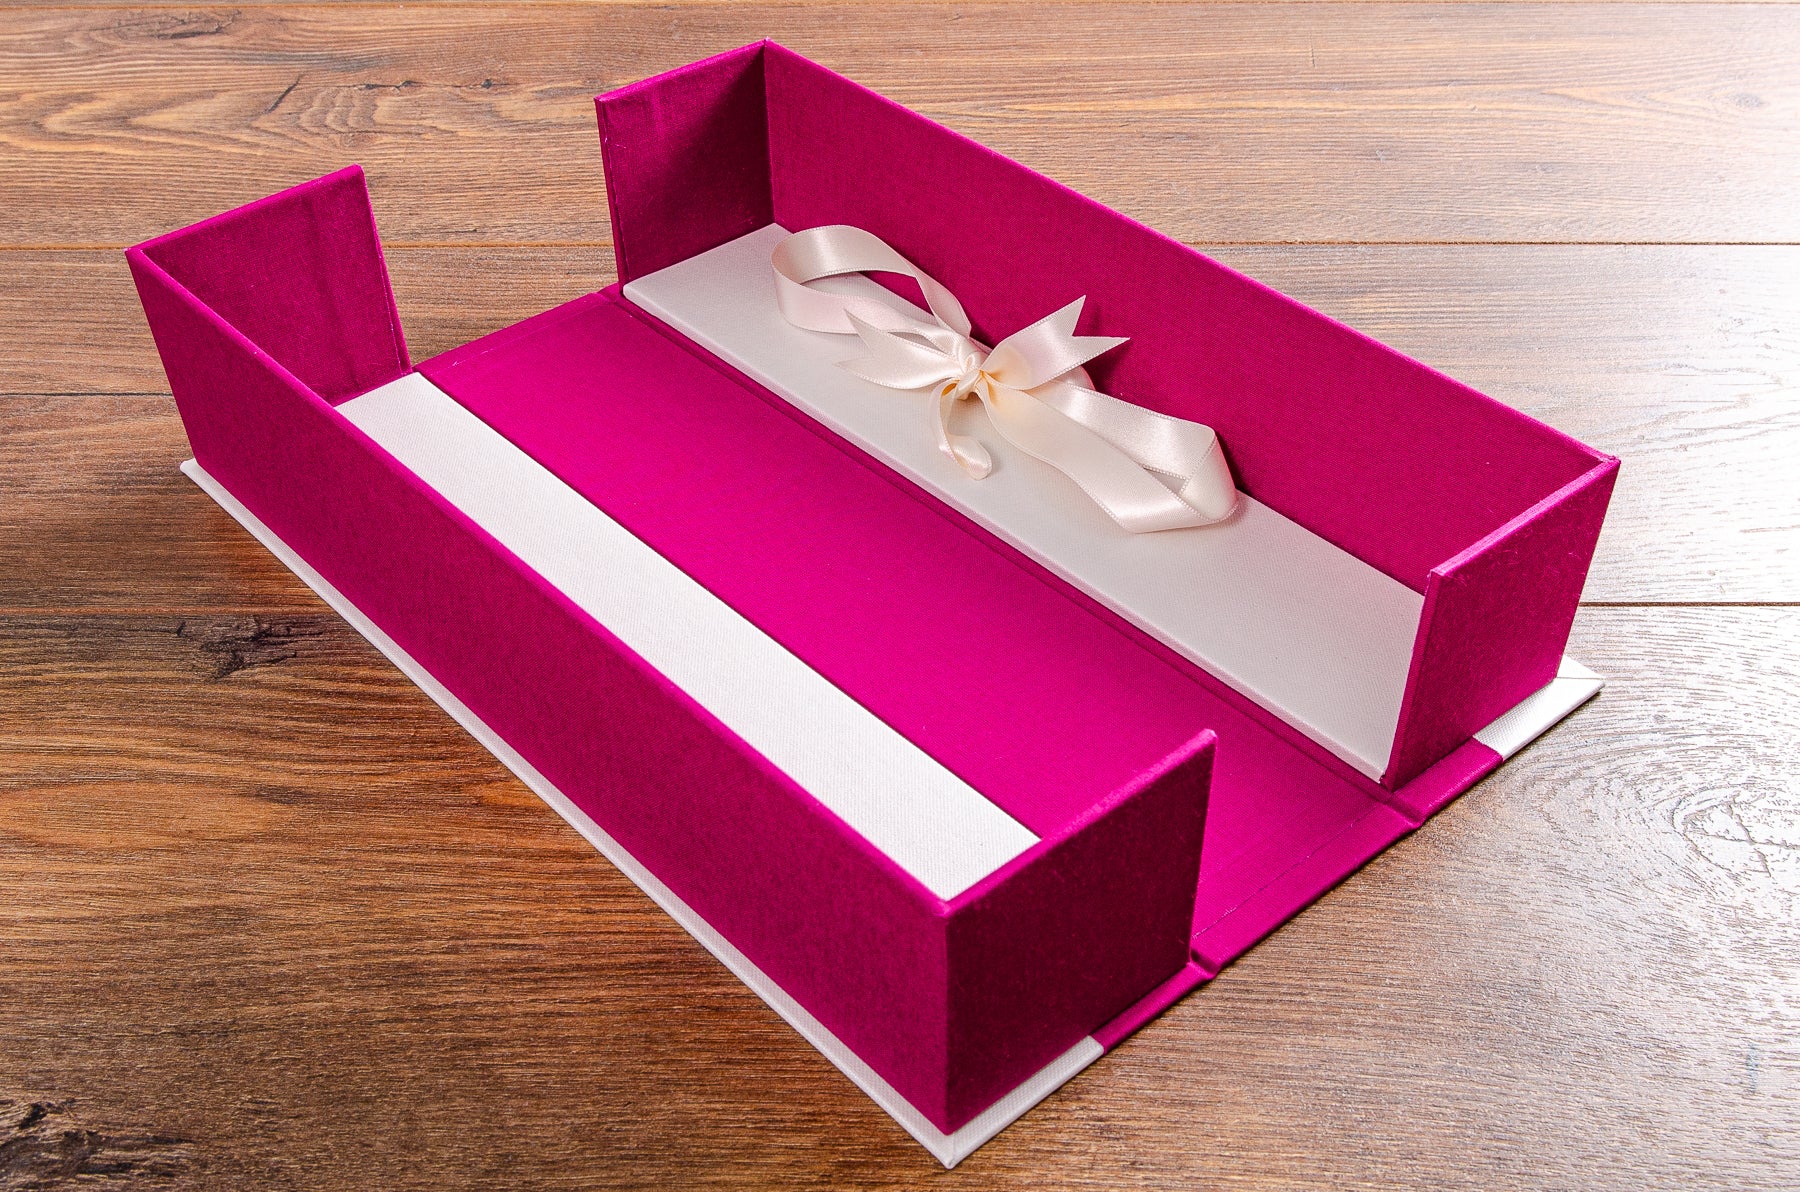 Bespoke christening box with gold foil stamped cover